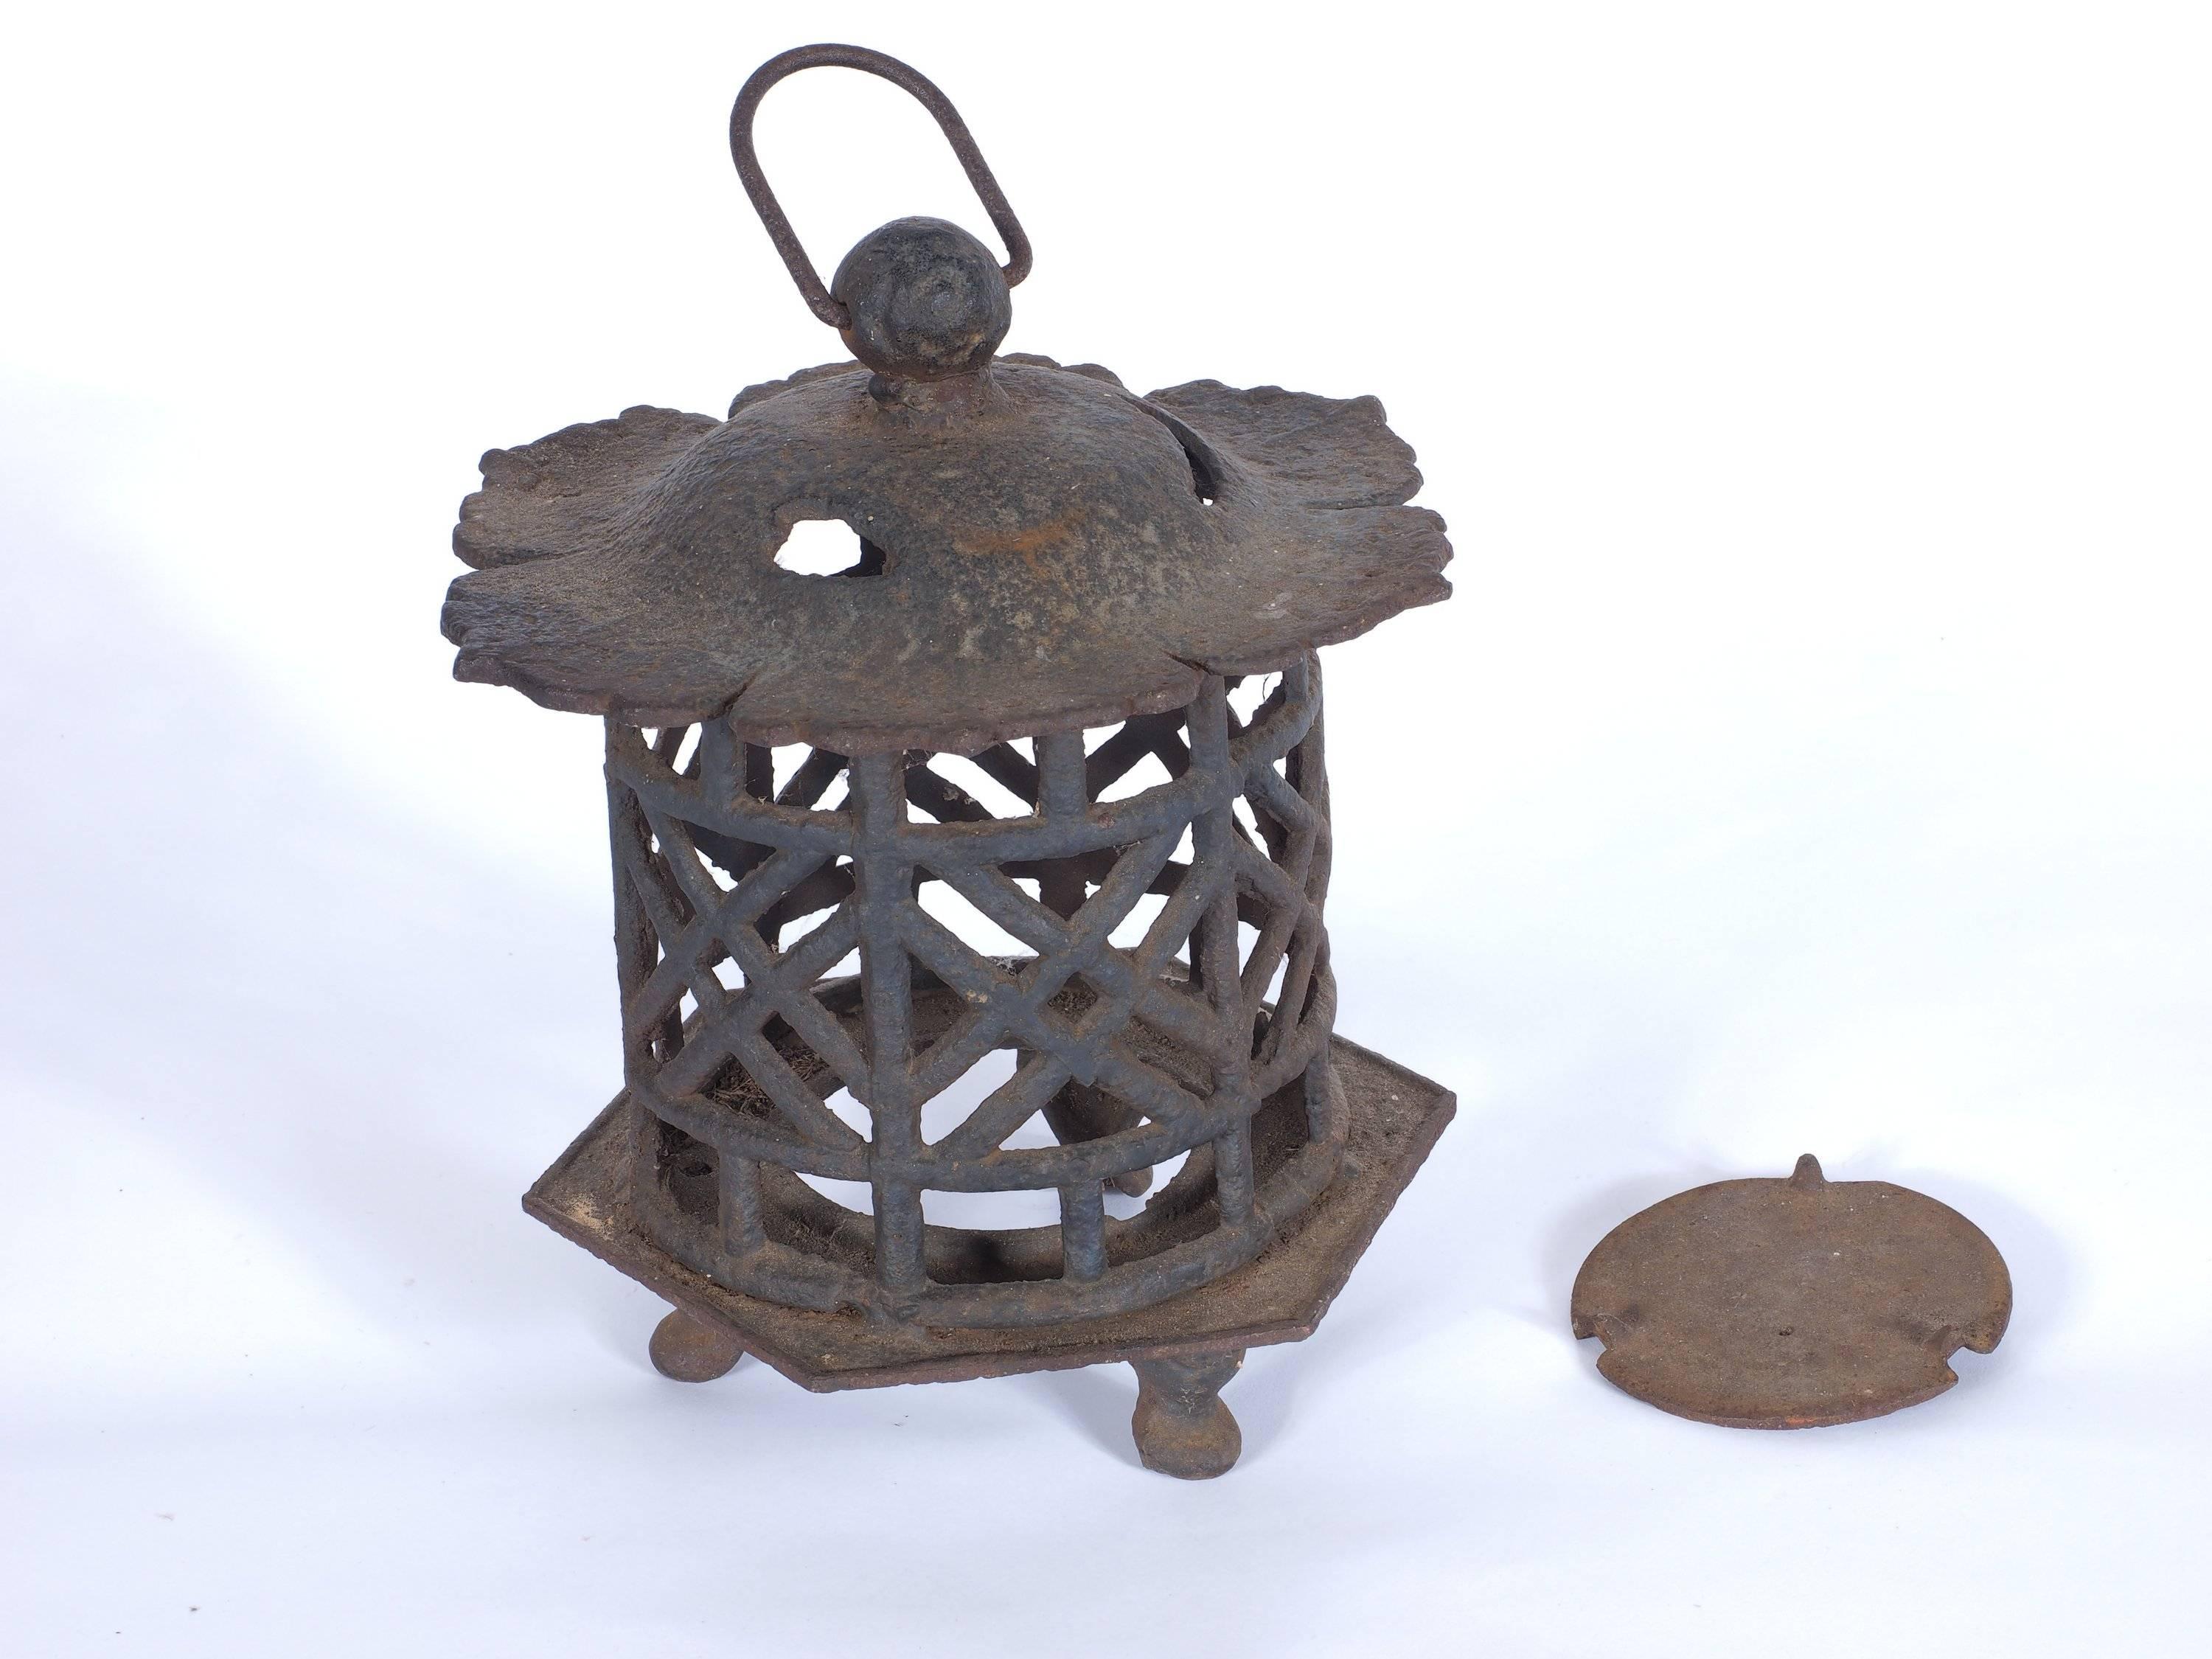 A pierced, heavy cast iron Japanese lantern on three feet with a ring for hanging. Good traditional form and condition.